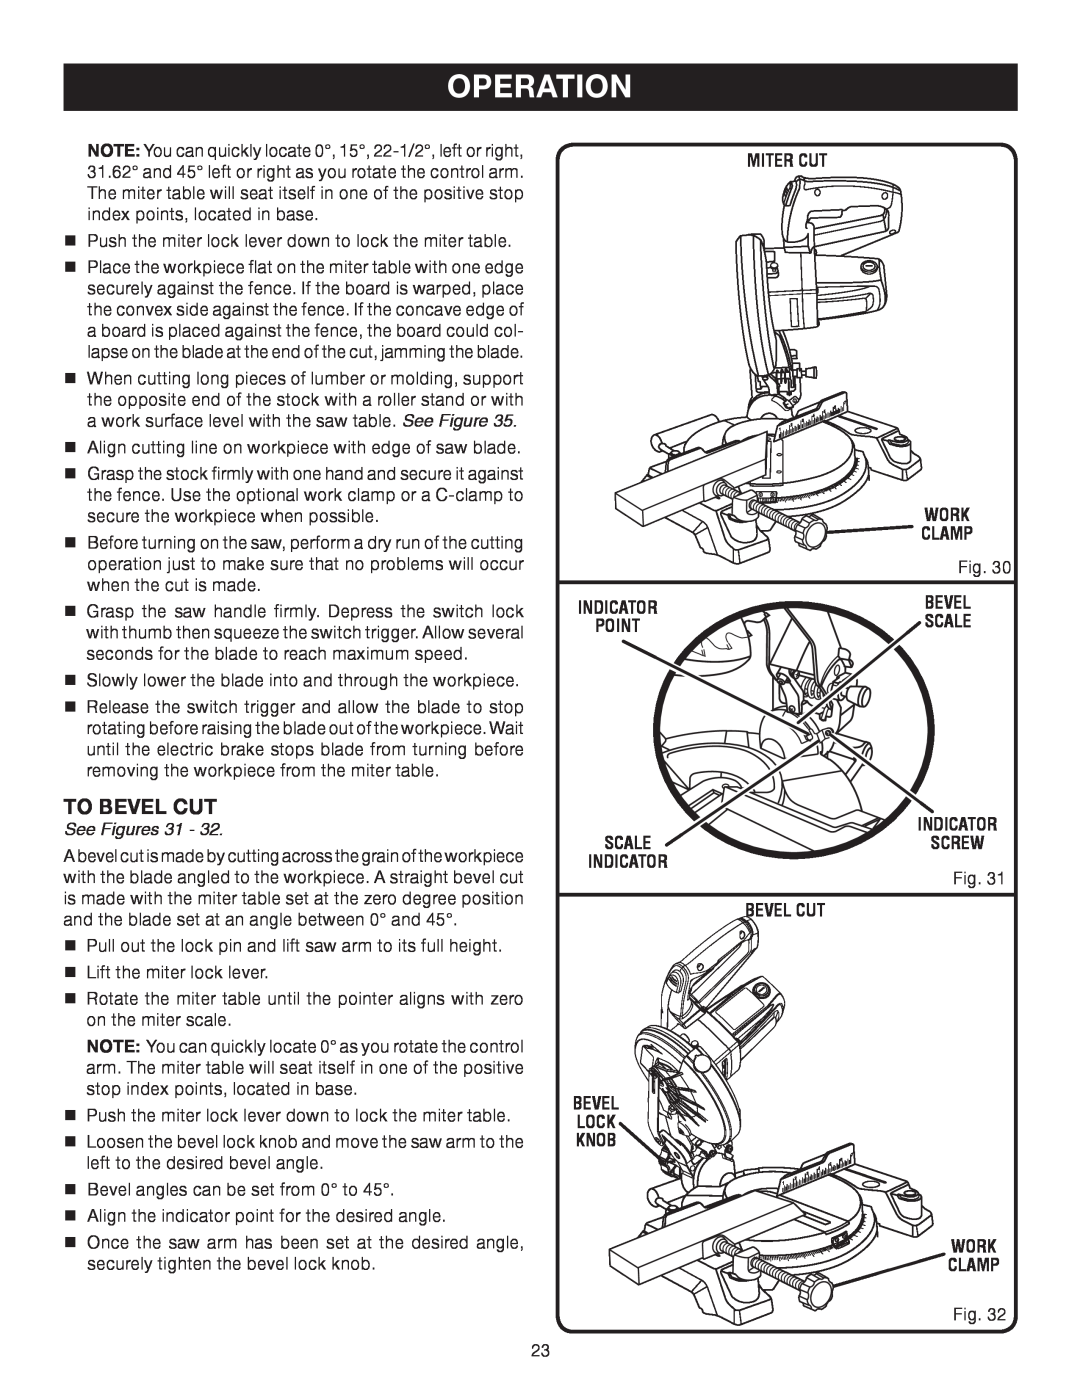 Ryobi TS1141 manual Operation, TO Bevel Cut, See Figures 31, miter CUT WORK CLAMP, INDICATOR scaleSCREW indicator 